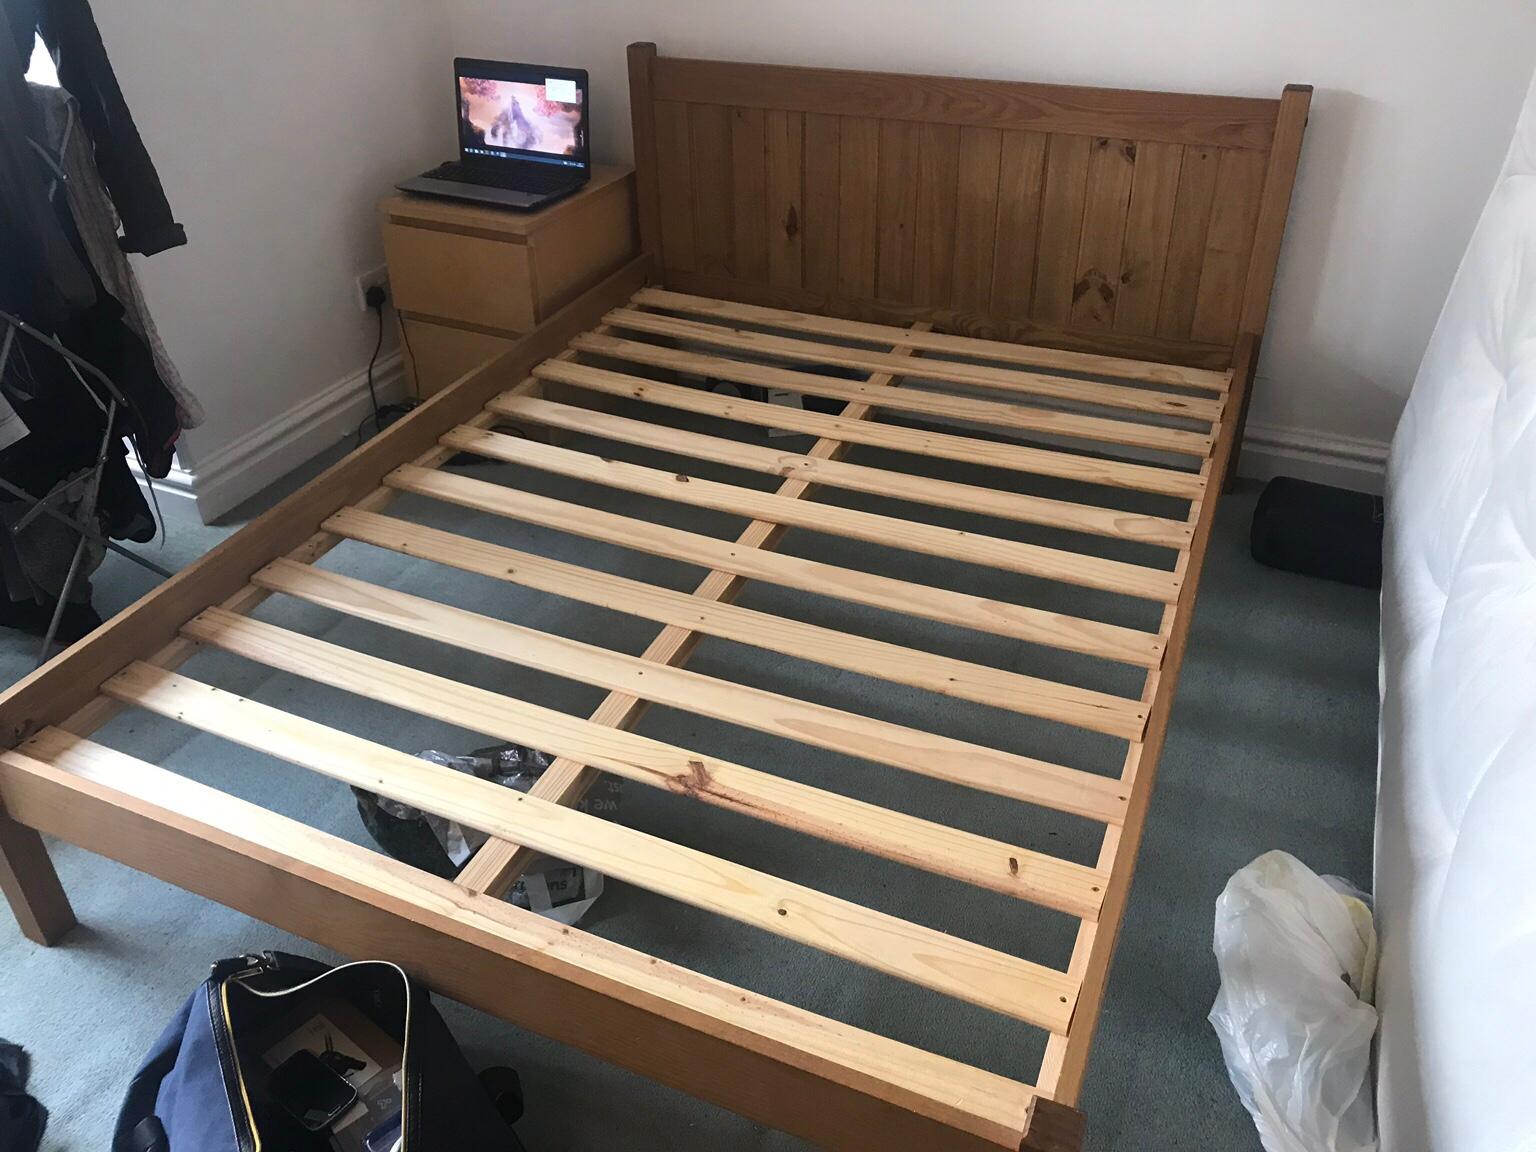 Ikea Bedframe In Se5 London For 70 00, Small Double Bed Frame Ikea